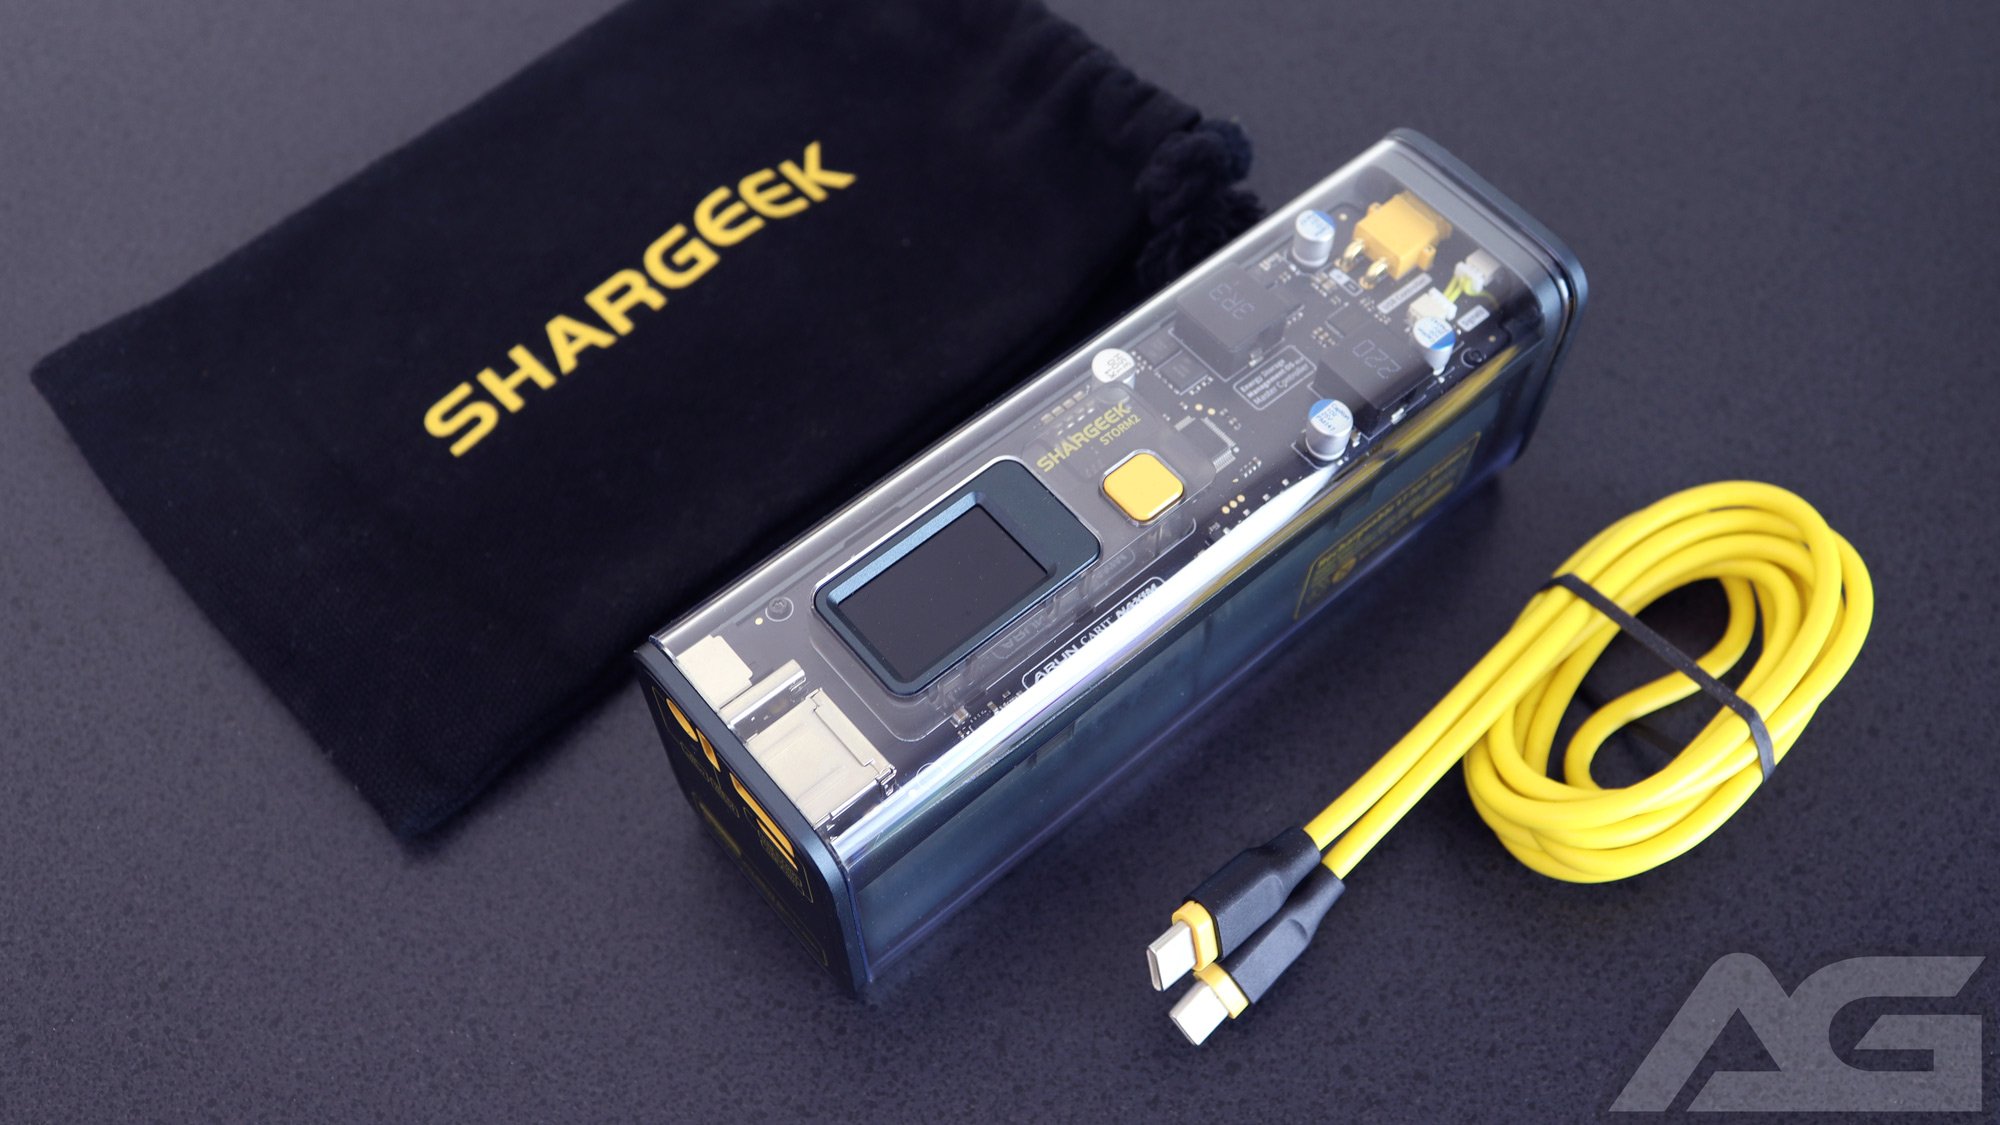 Shargeek Storm 2 Review - Bald Select-Help You Select the Right Product